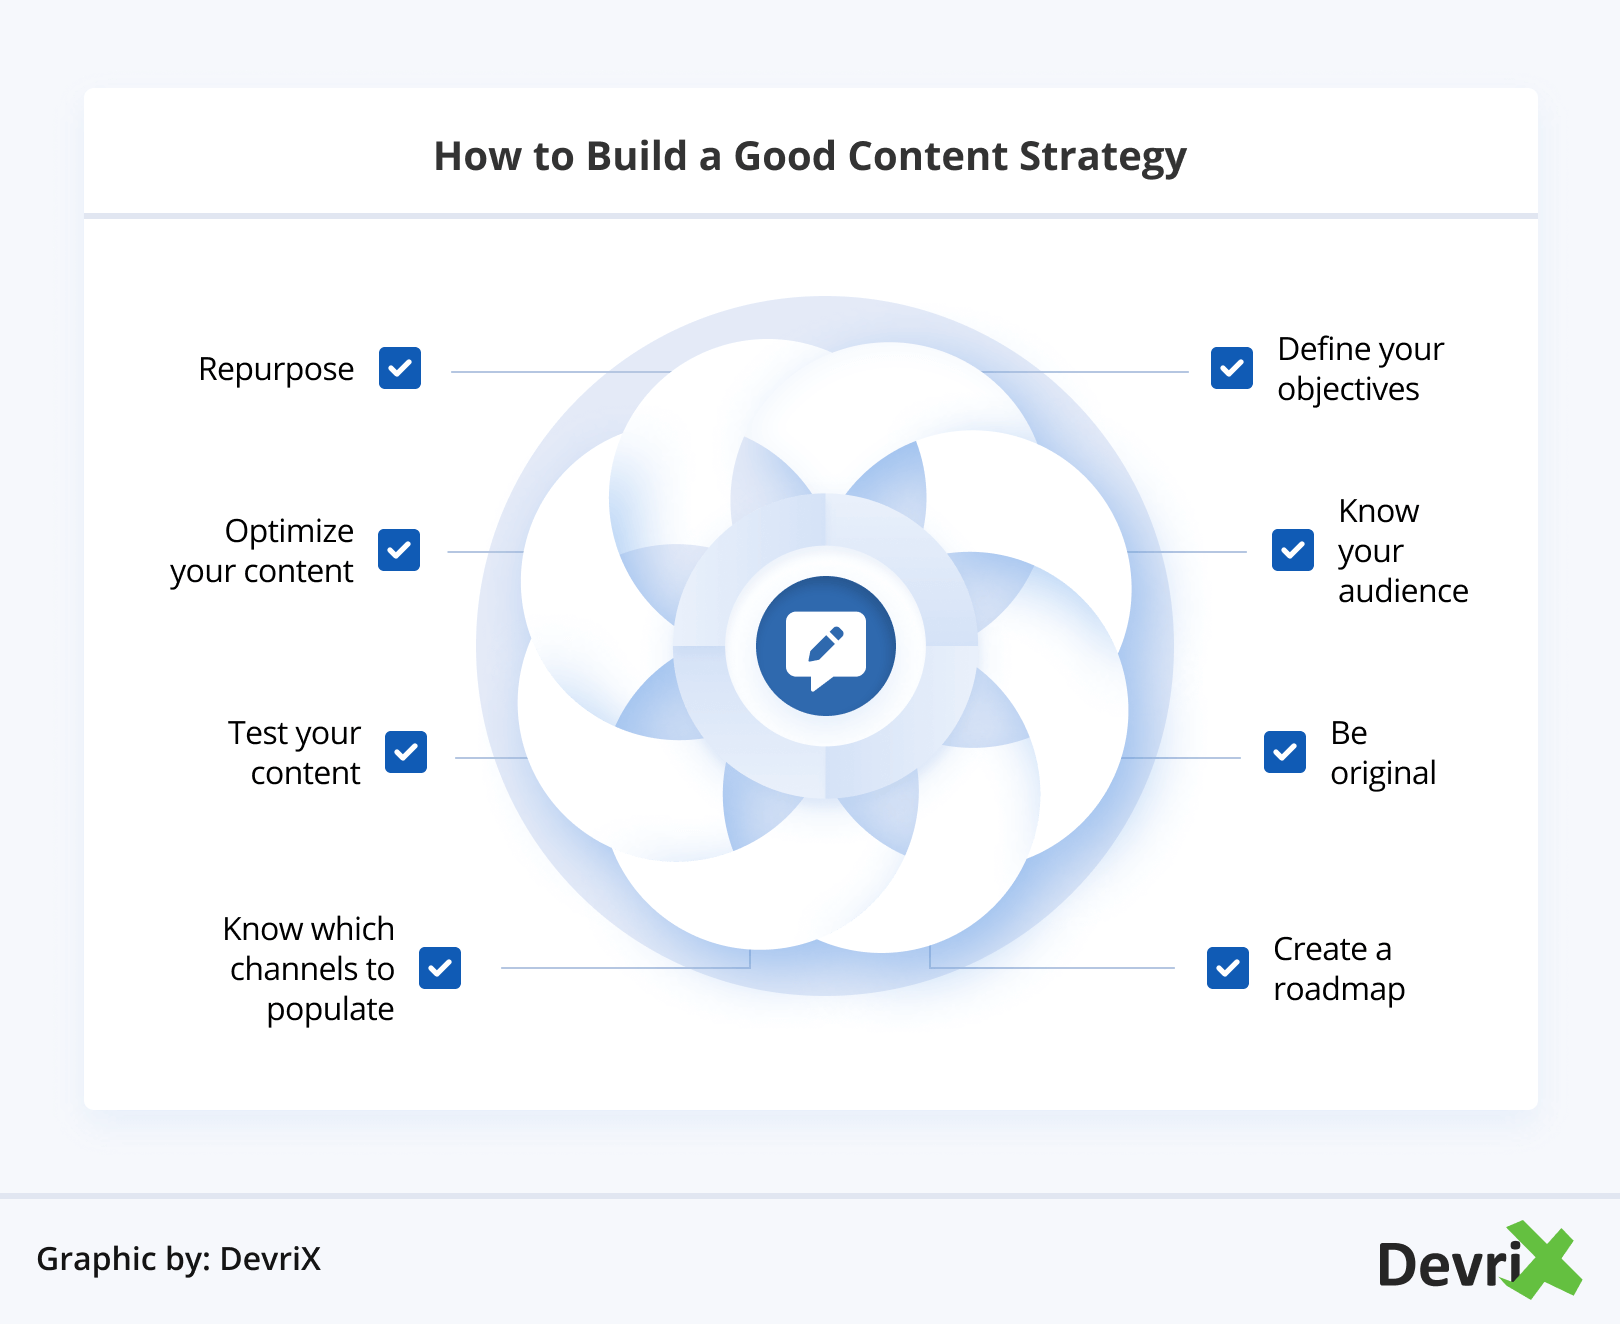 How to Build a Good Content Strategy